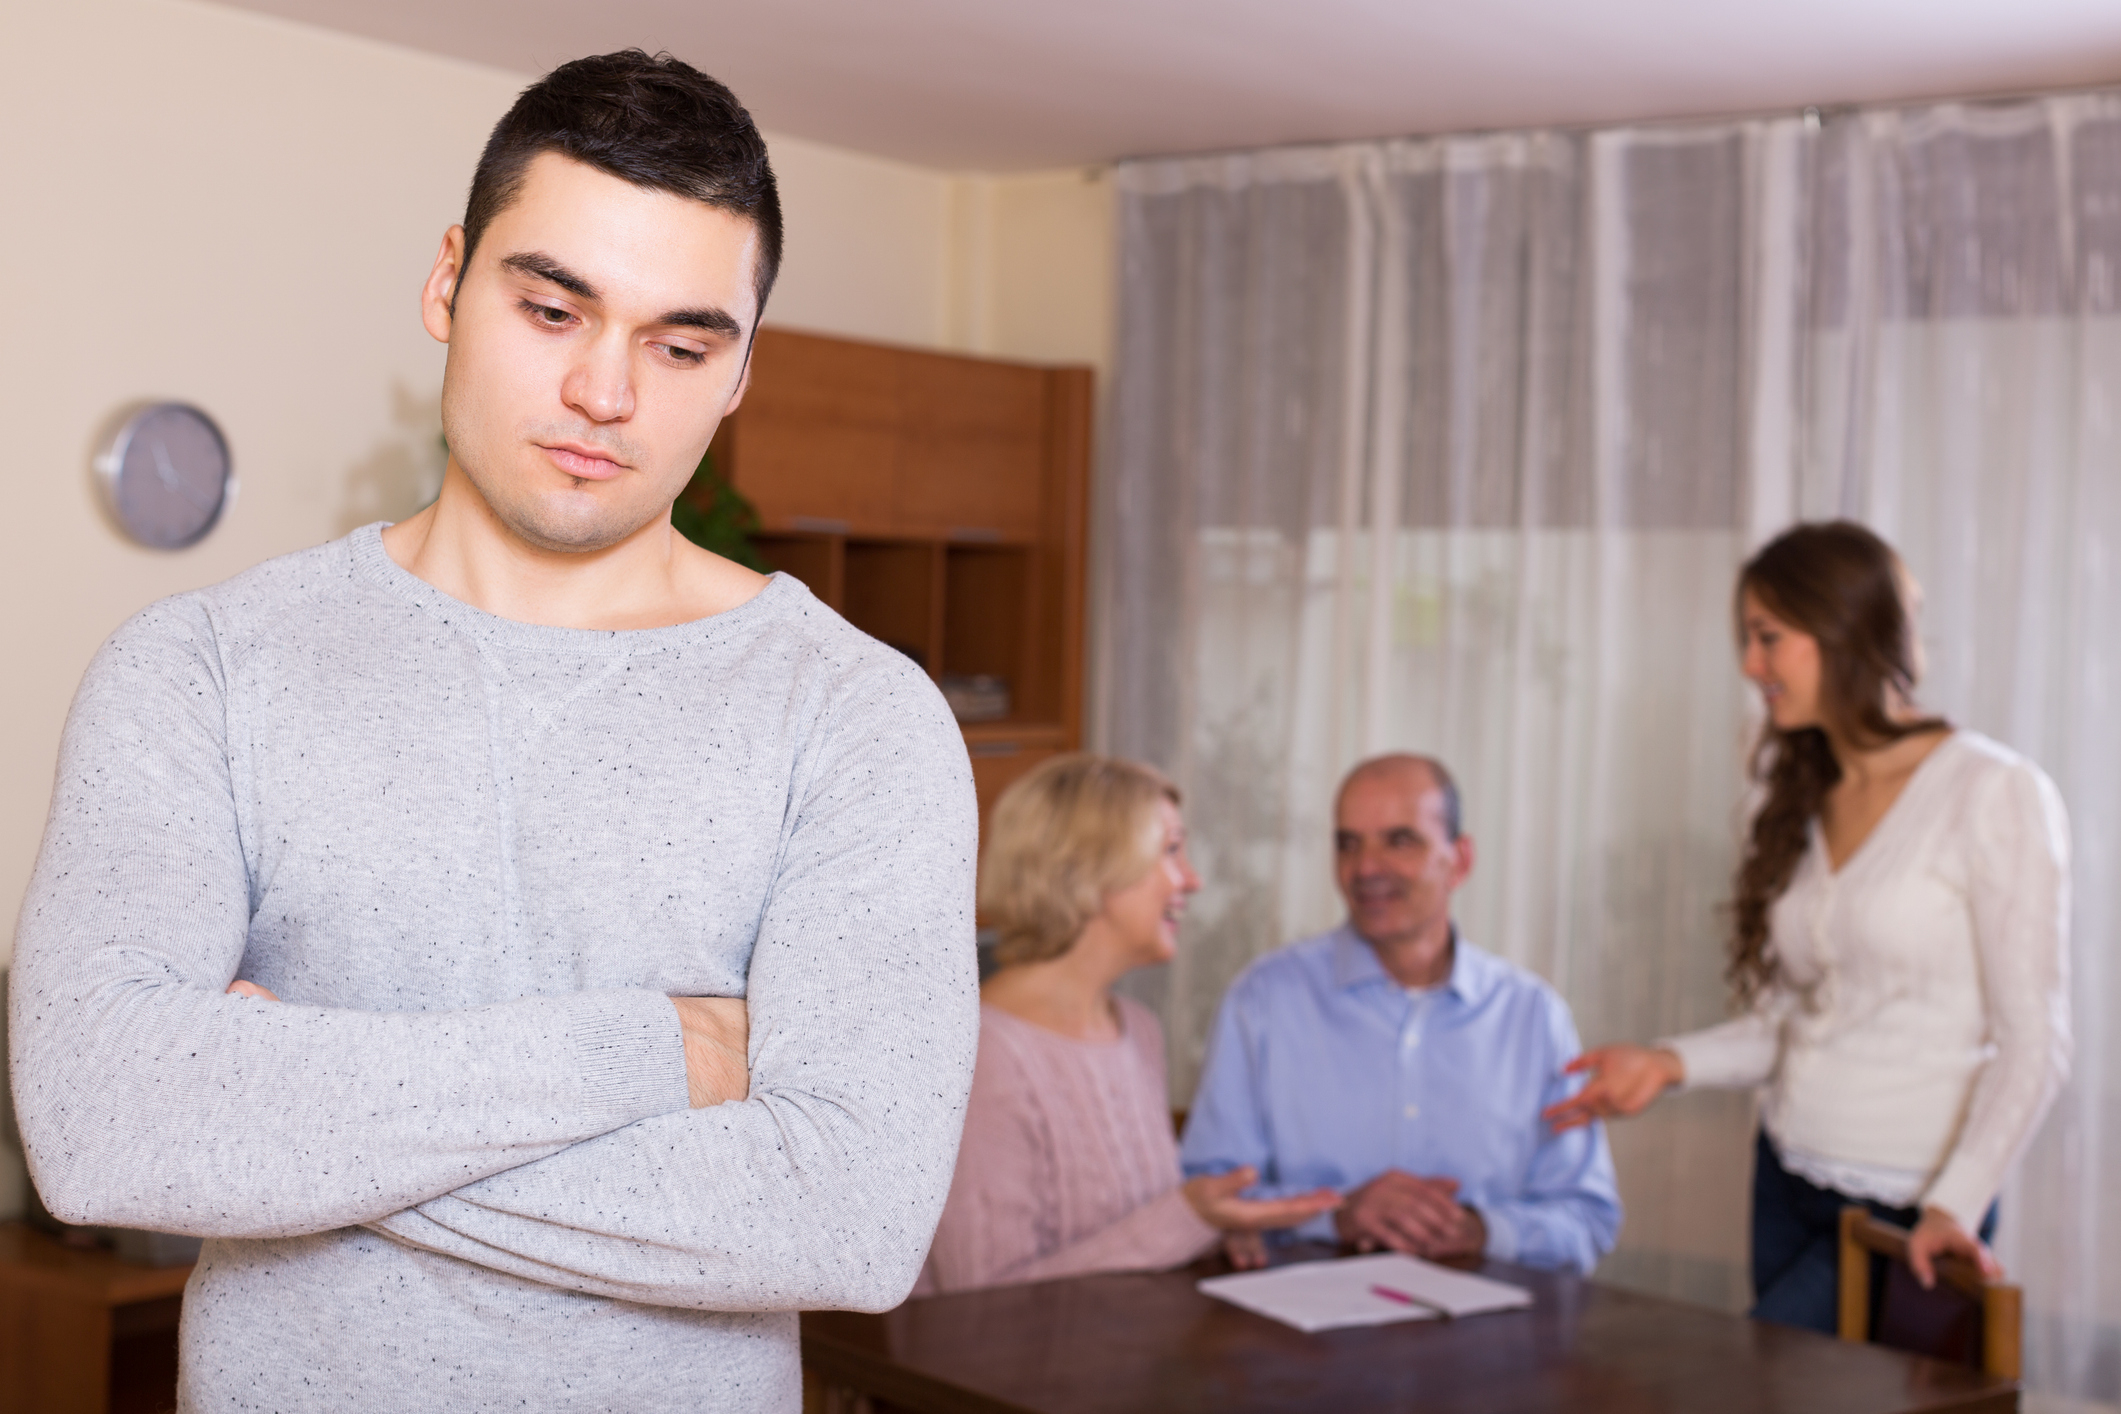 Unhappy man faced with misunderstanding big family